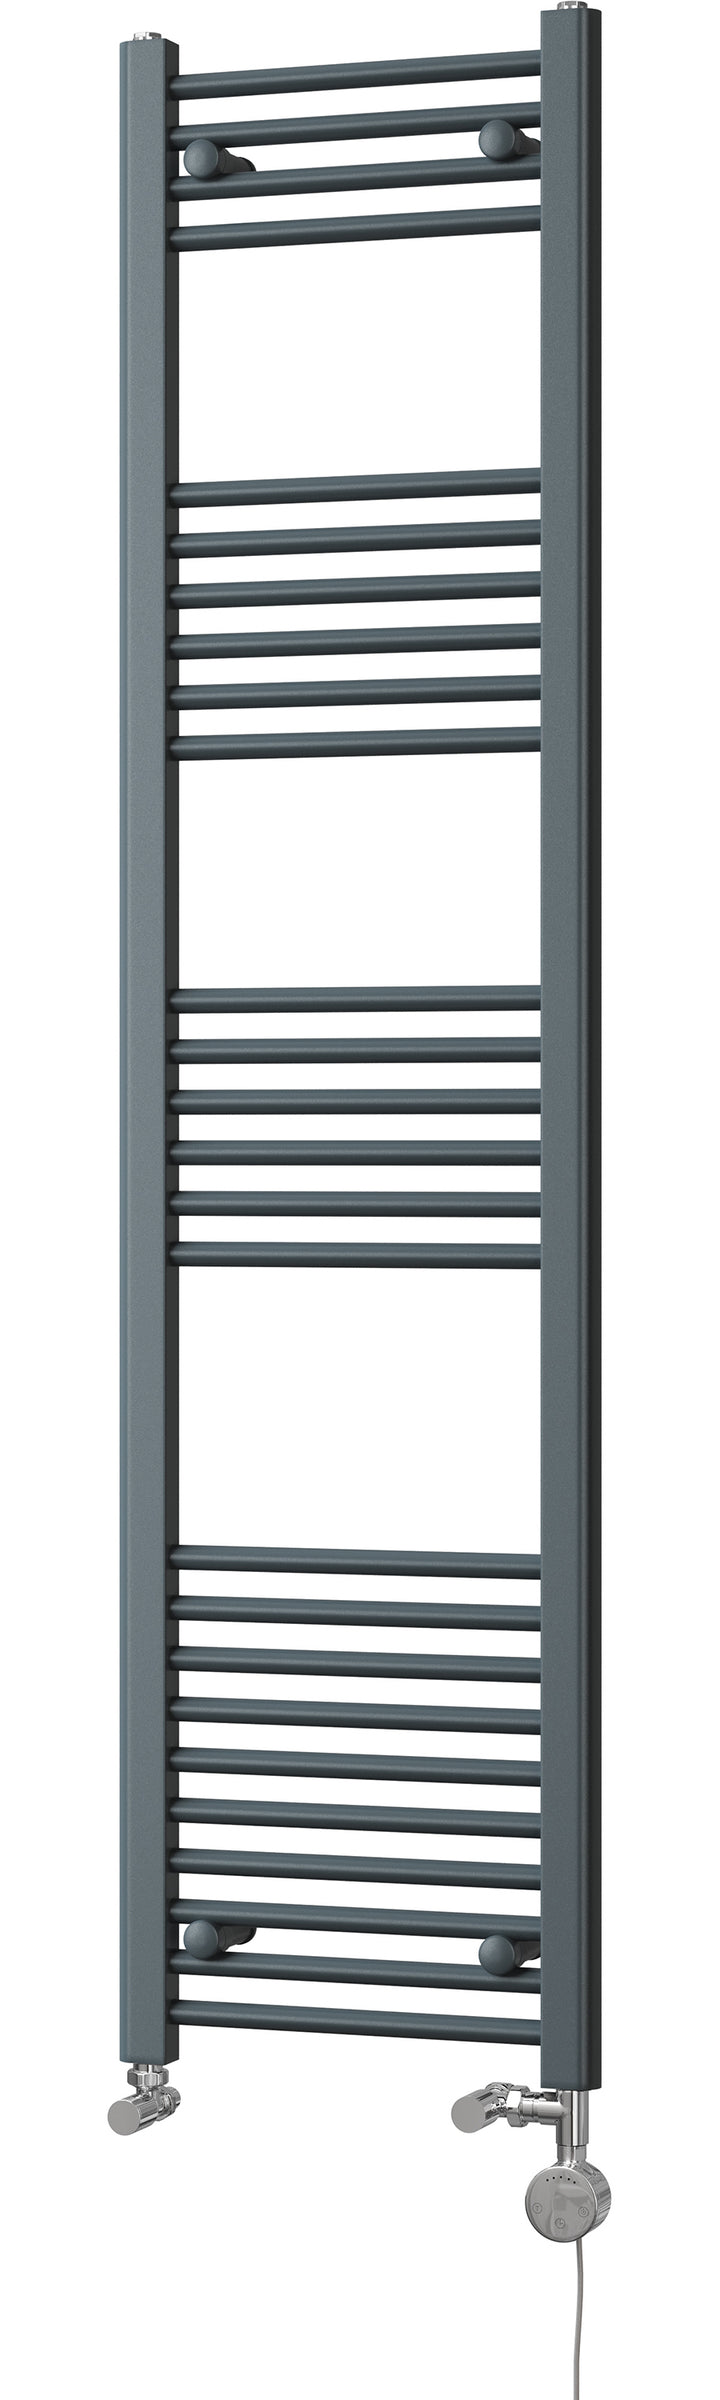 Zennor - Anthracite Dual Fuel Towel Rail  H1600mm x W400mm Thermostatic - Straight